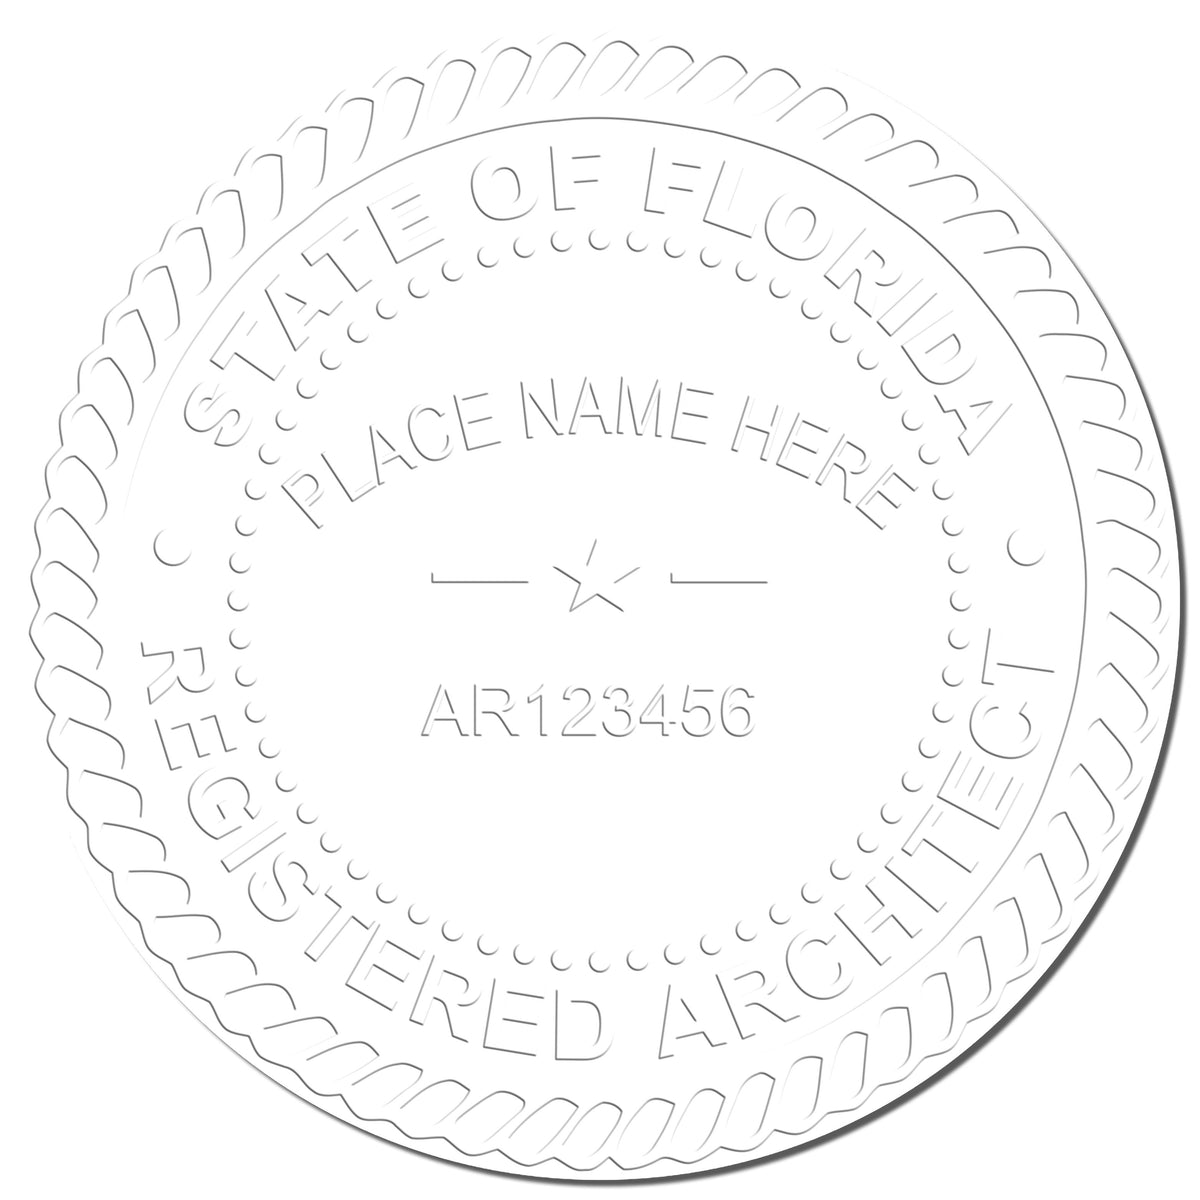 A photograph of the Handheld Florida Architect Seal Embosser stamp impression reveals a vivid, professional image of the on paper.